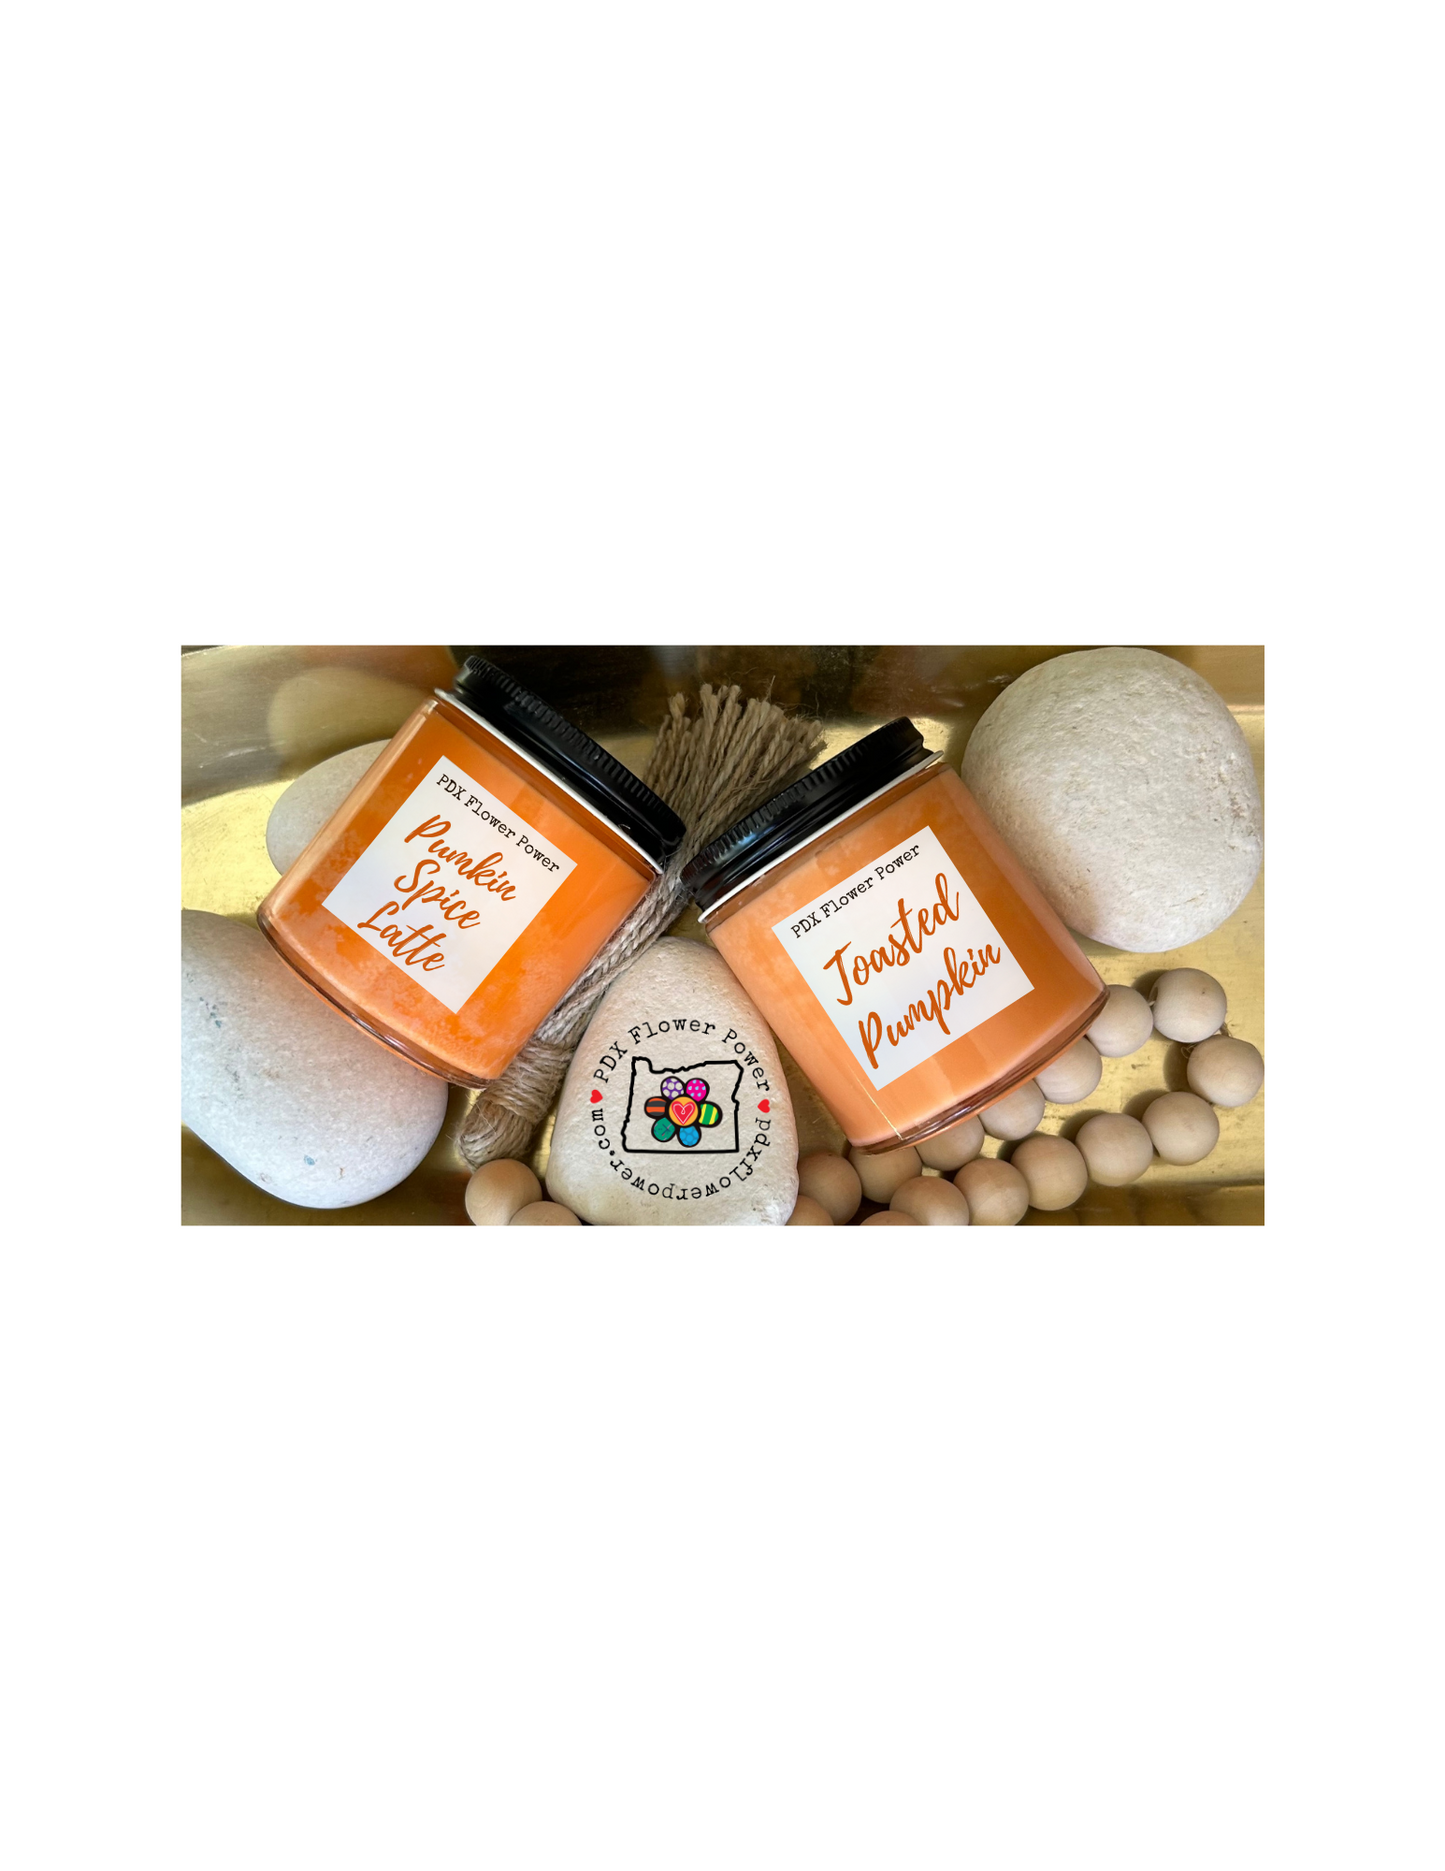 Pumpkin Spice Latte & Toasted Pumpkin soy candle set,Pdx Flower Power 100% USA grown soy candle, Coffee Lovers Candle